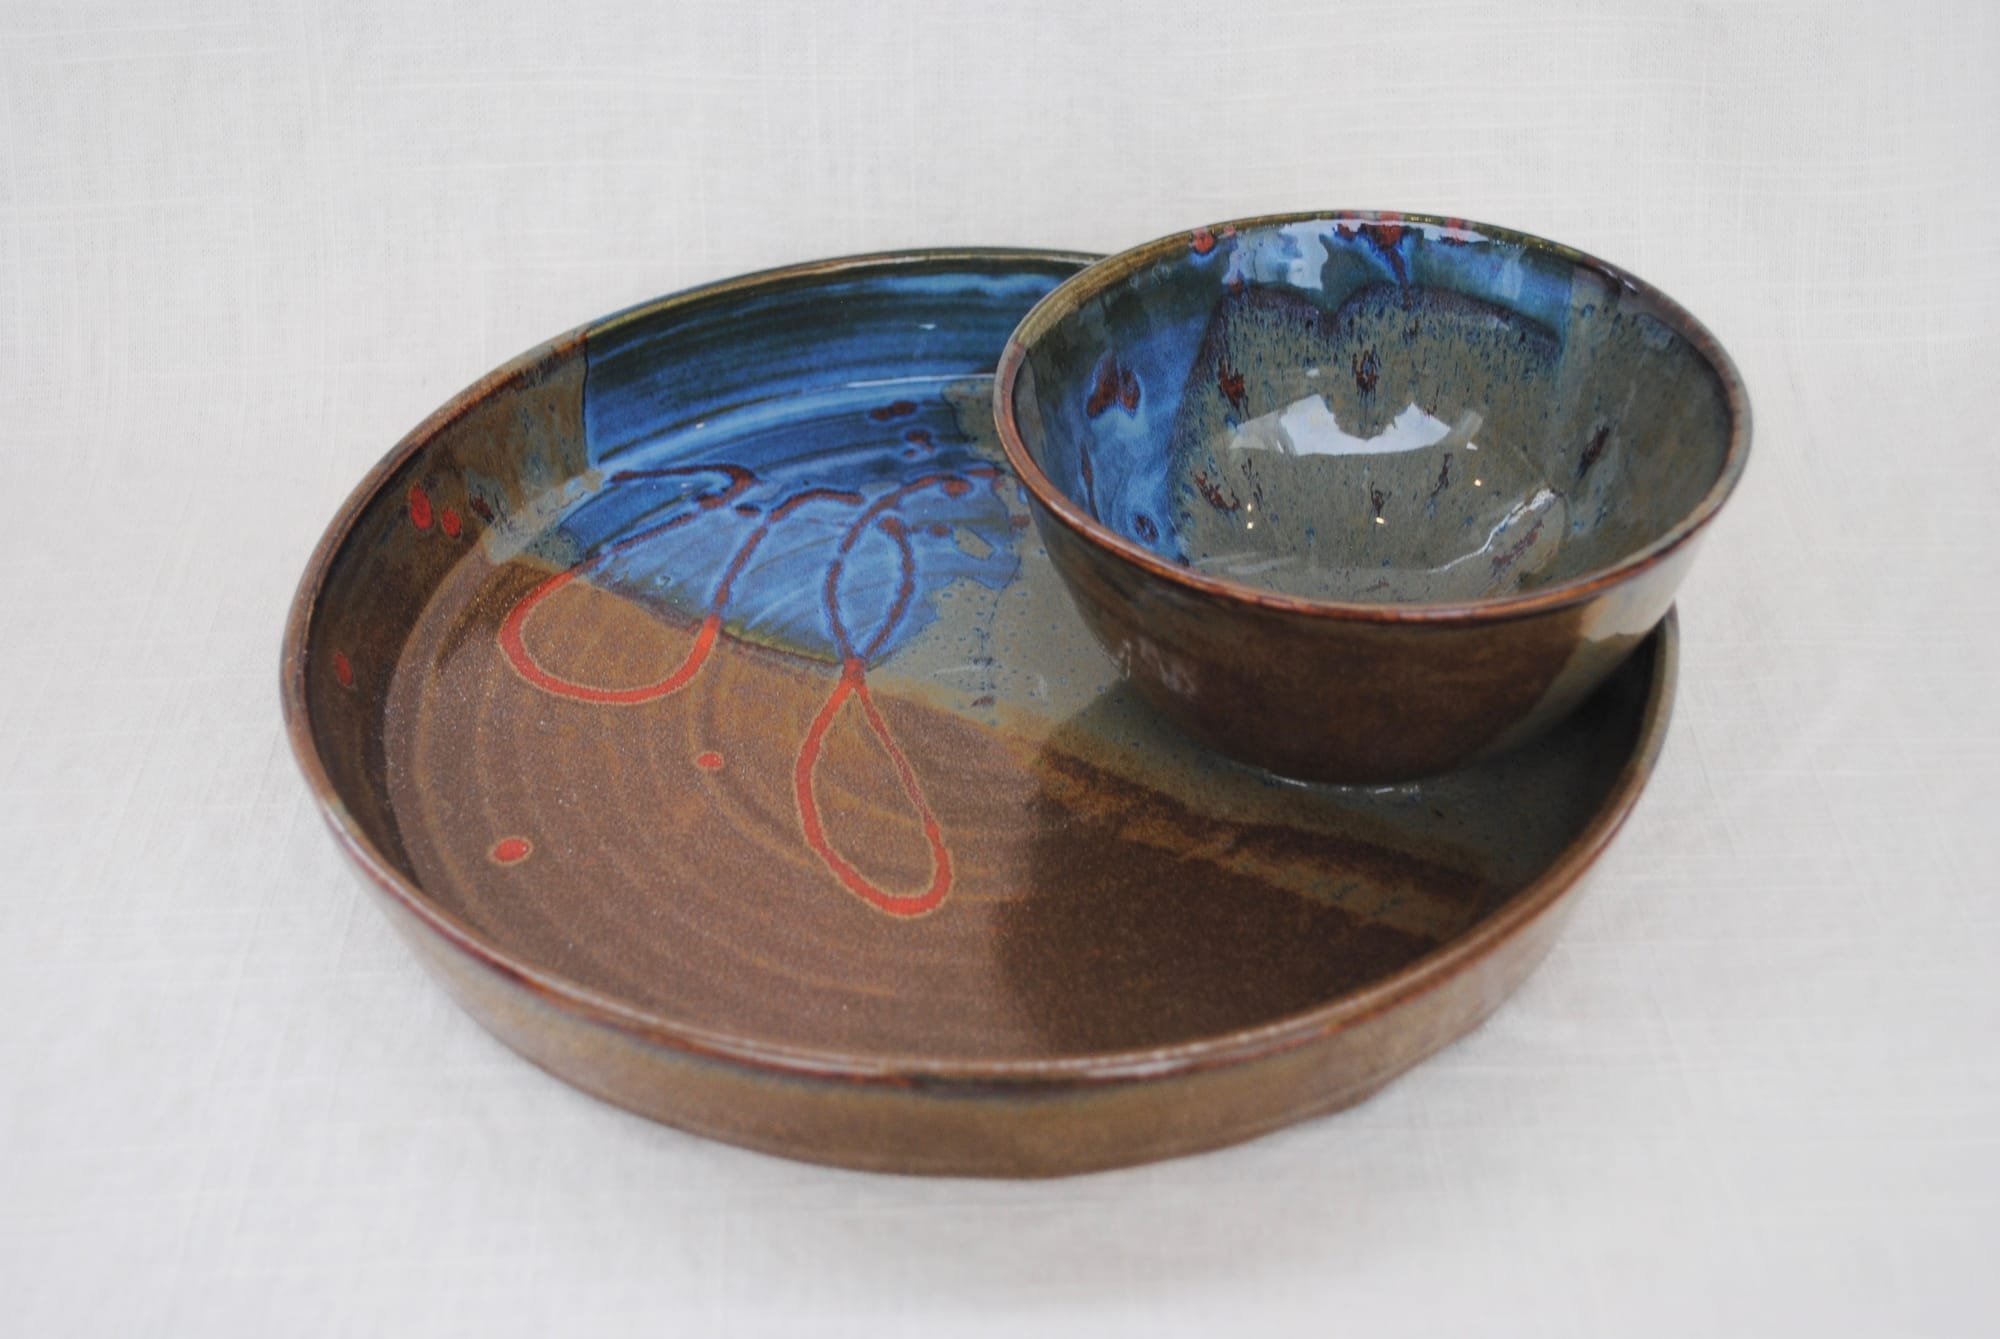 Serving tray with attached bowl